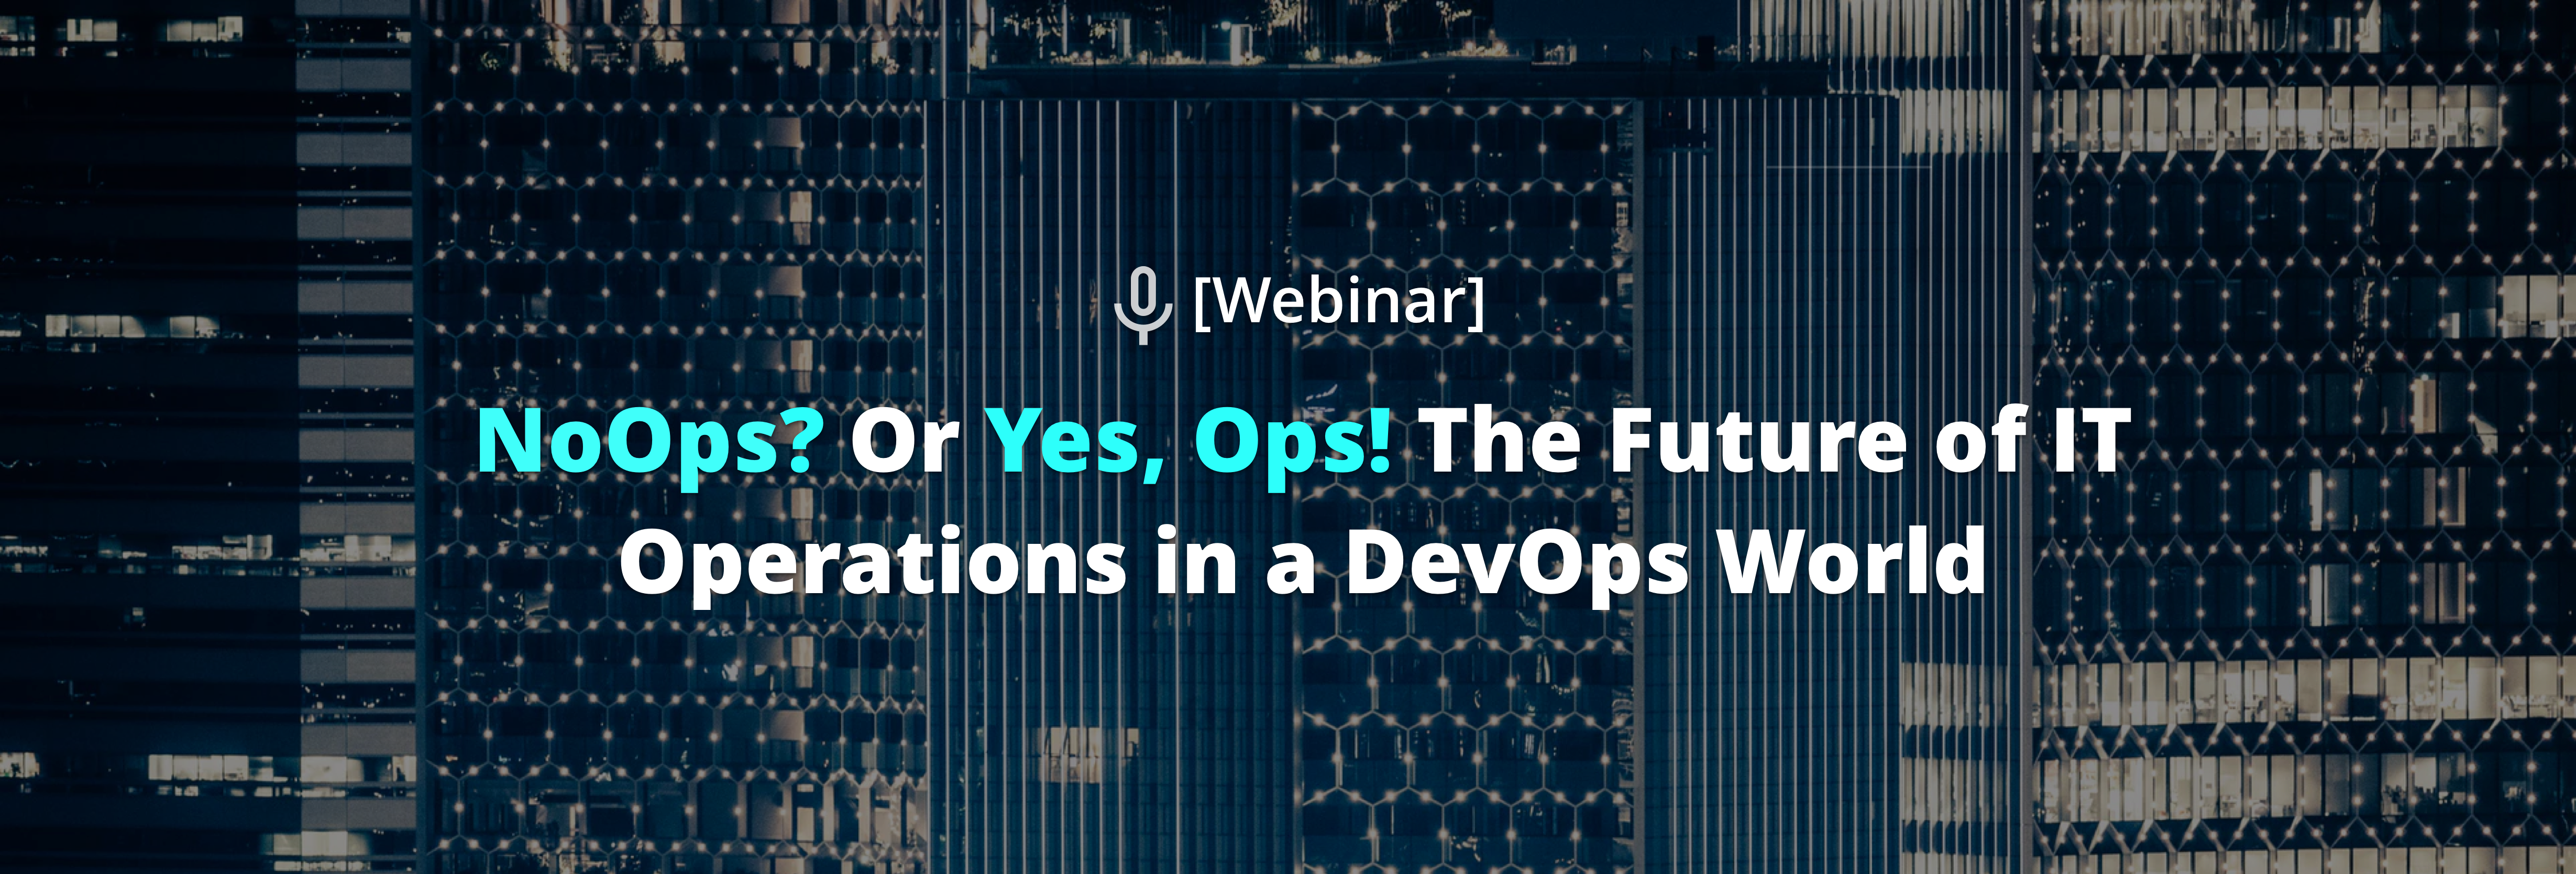 NoOps? Or Yes, Ops! The Future of IT Operations in a DevOps World